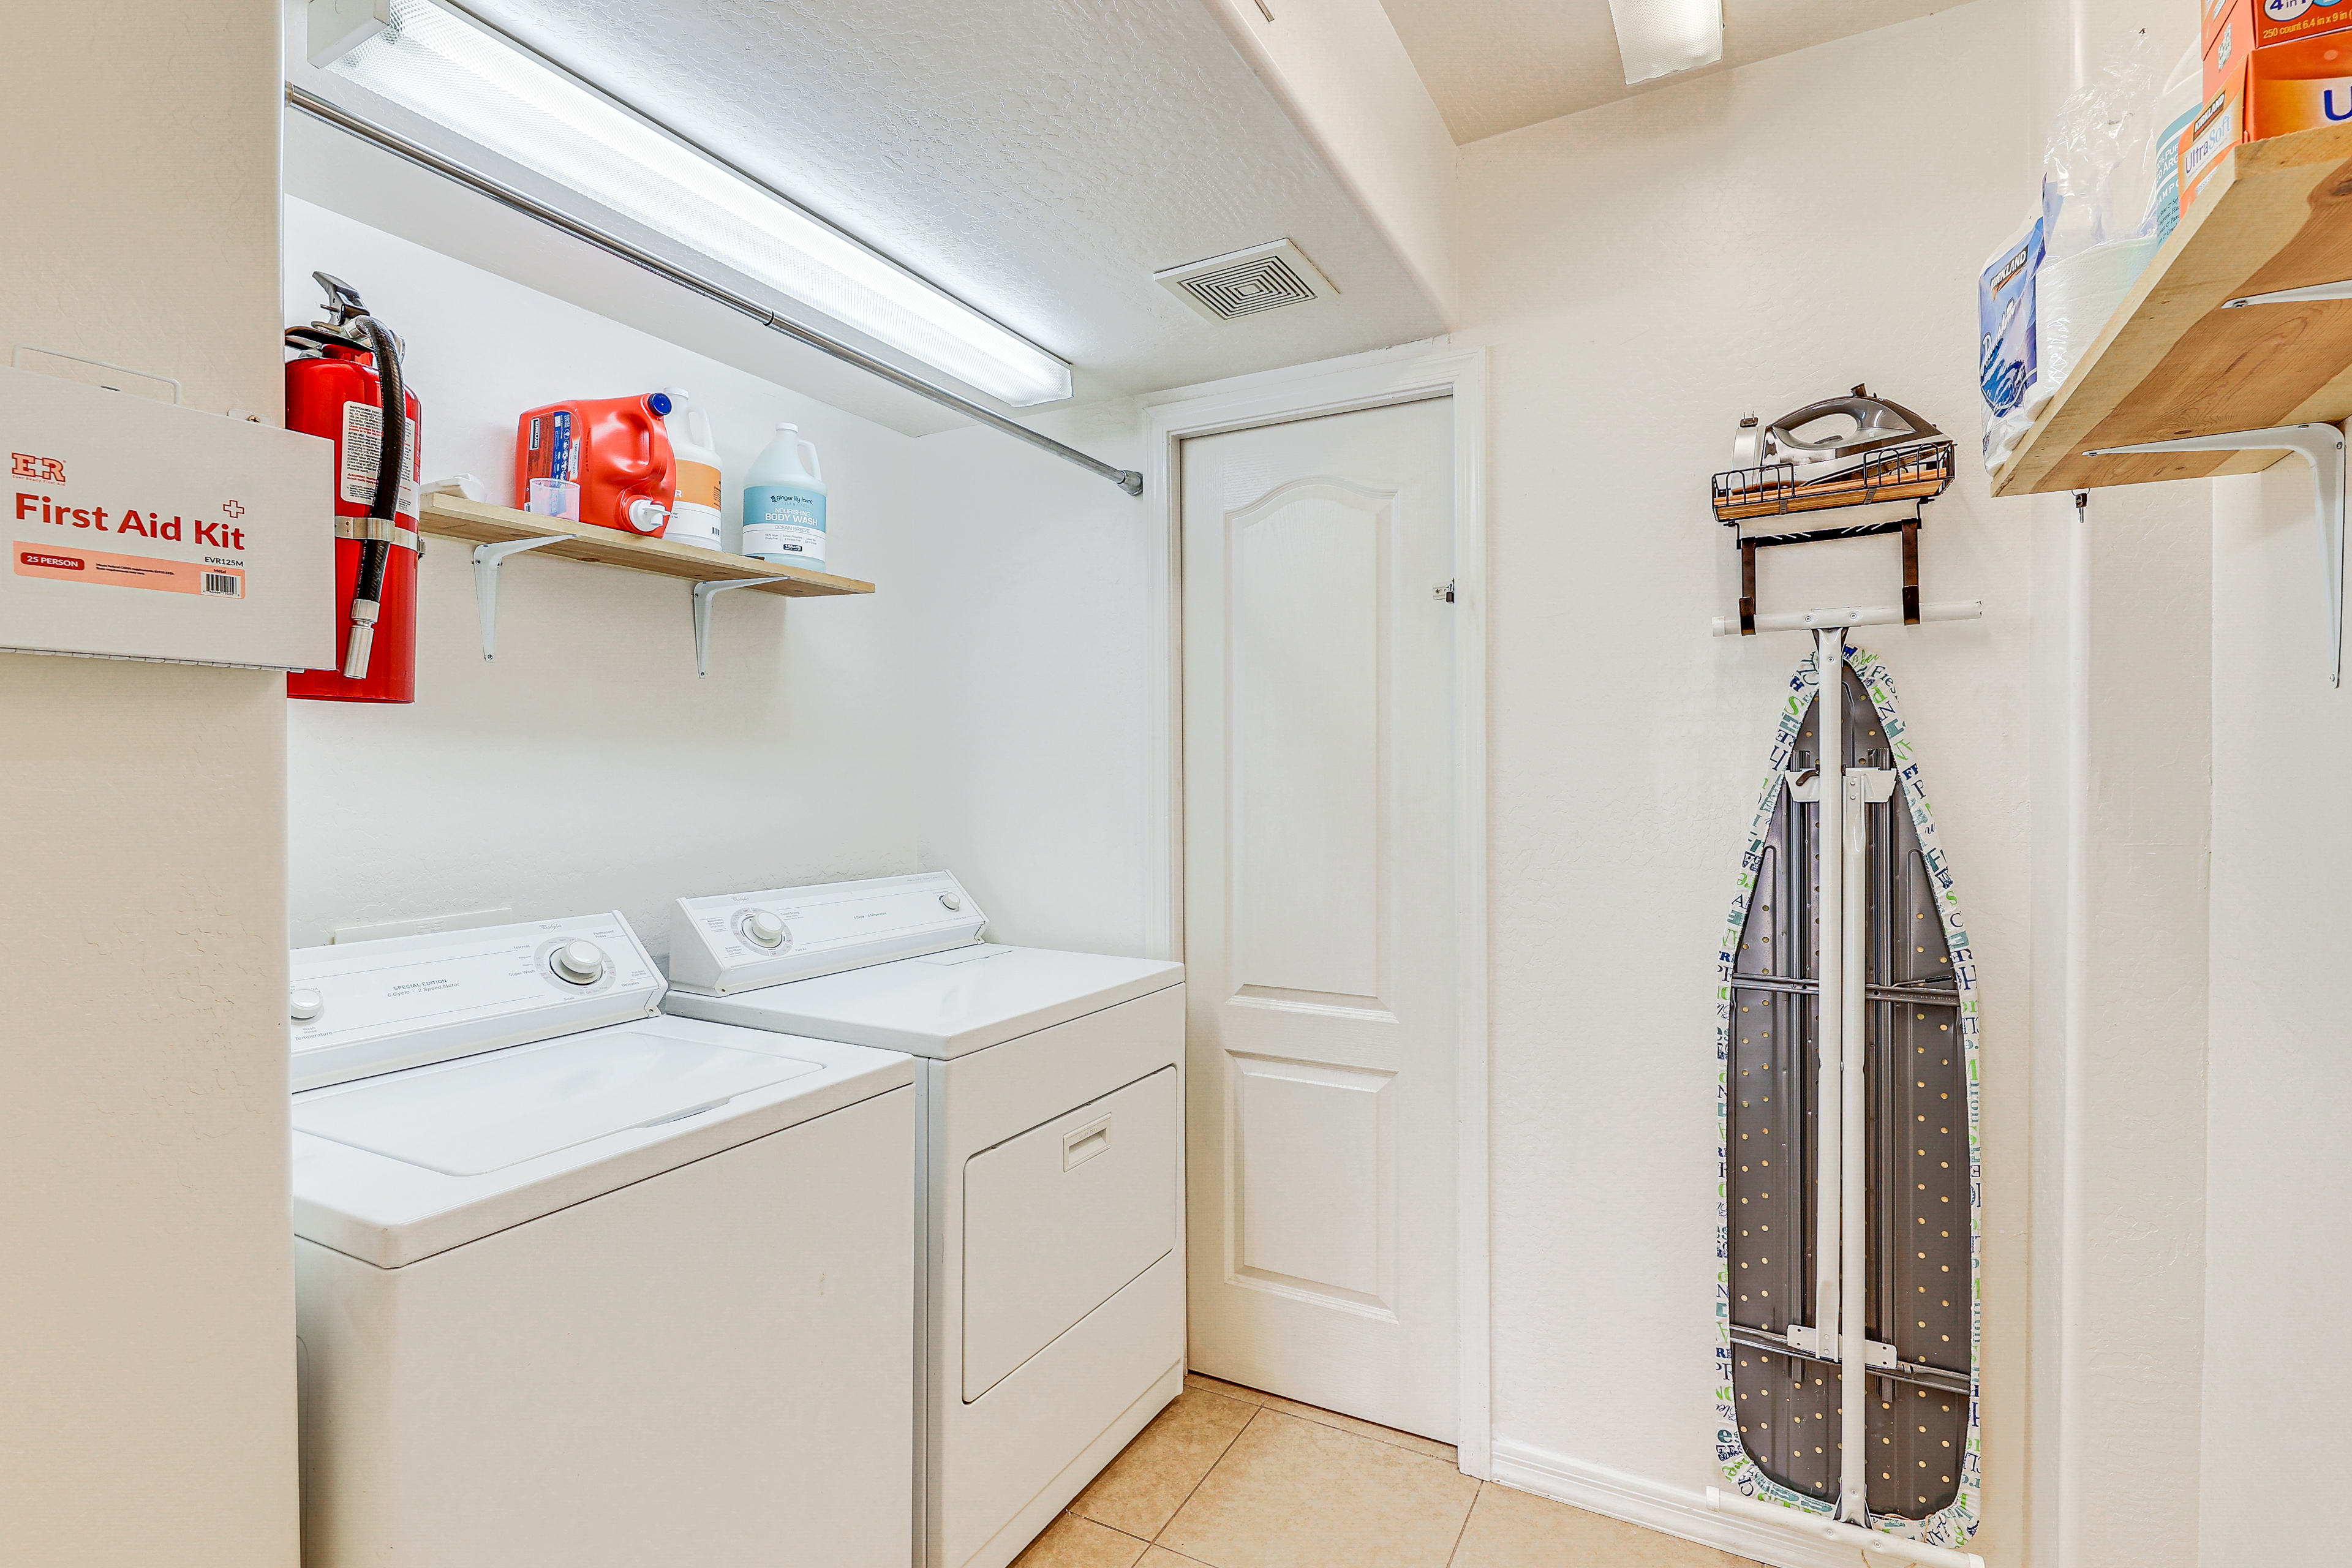 Laundry Room | Washer & Dryer | Detergent Provided